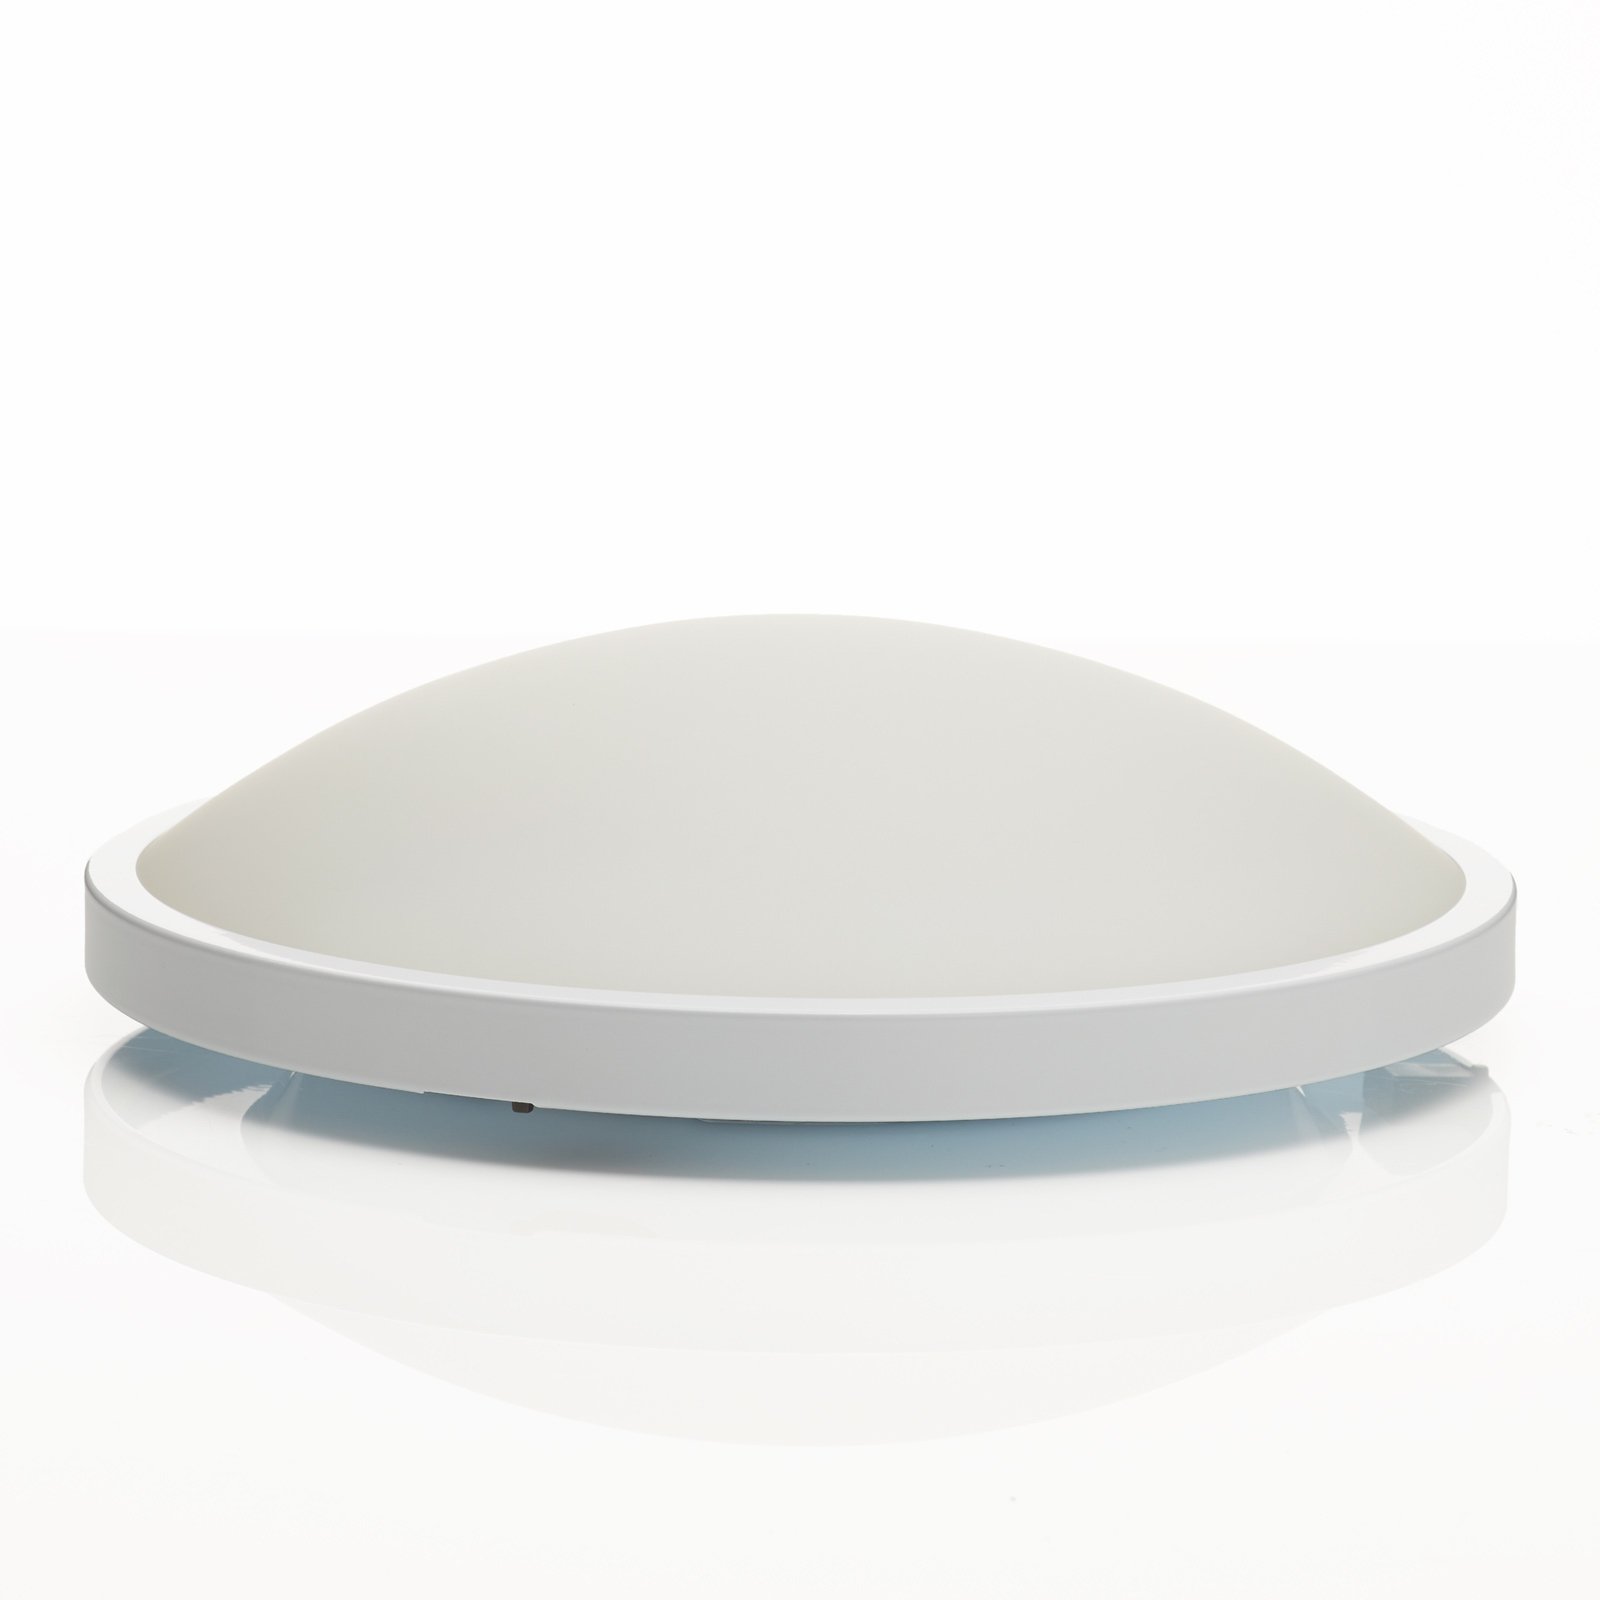 Ceiling and wall light Plaza 31 cm white